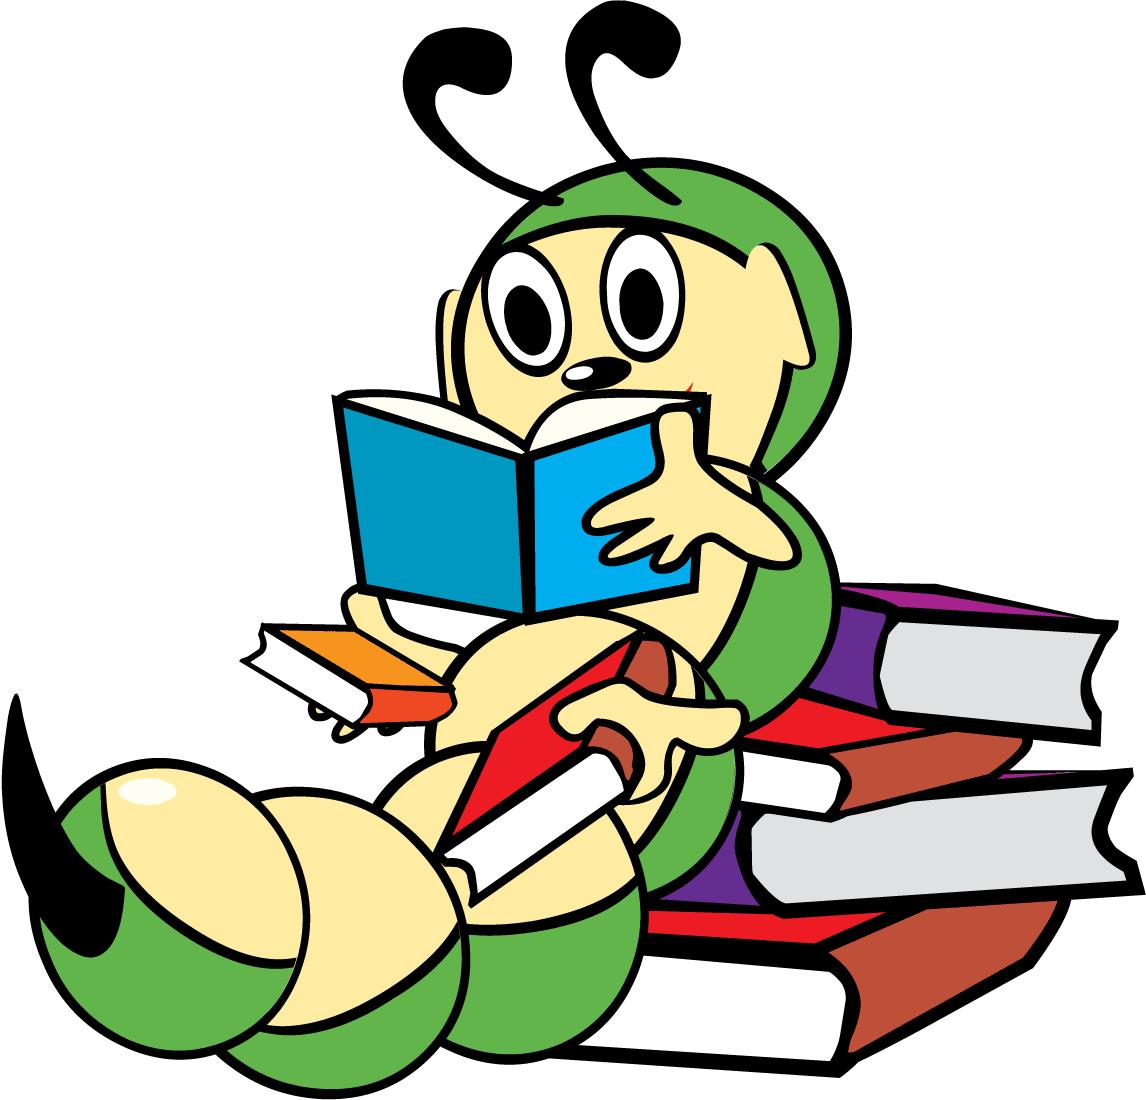 Student taking a test clip art | Clipart Panda - Free Clipart Images